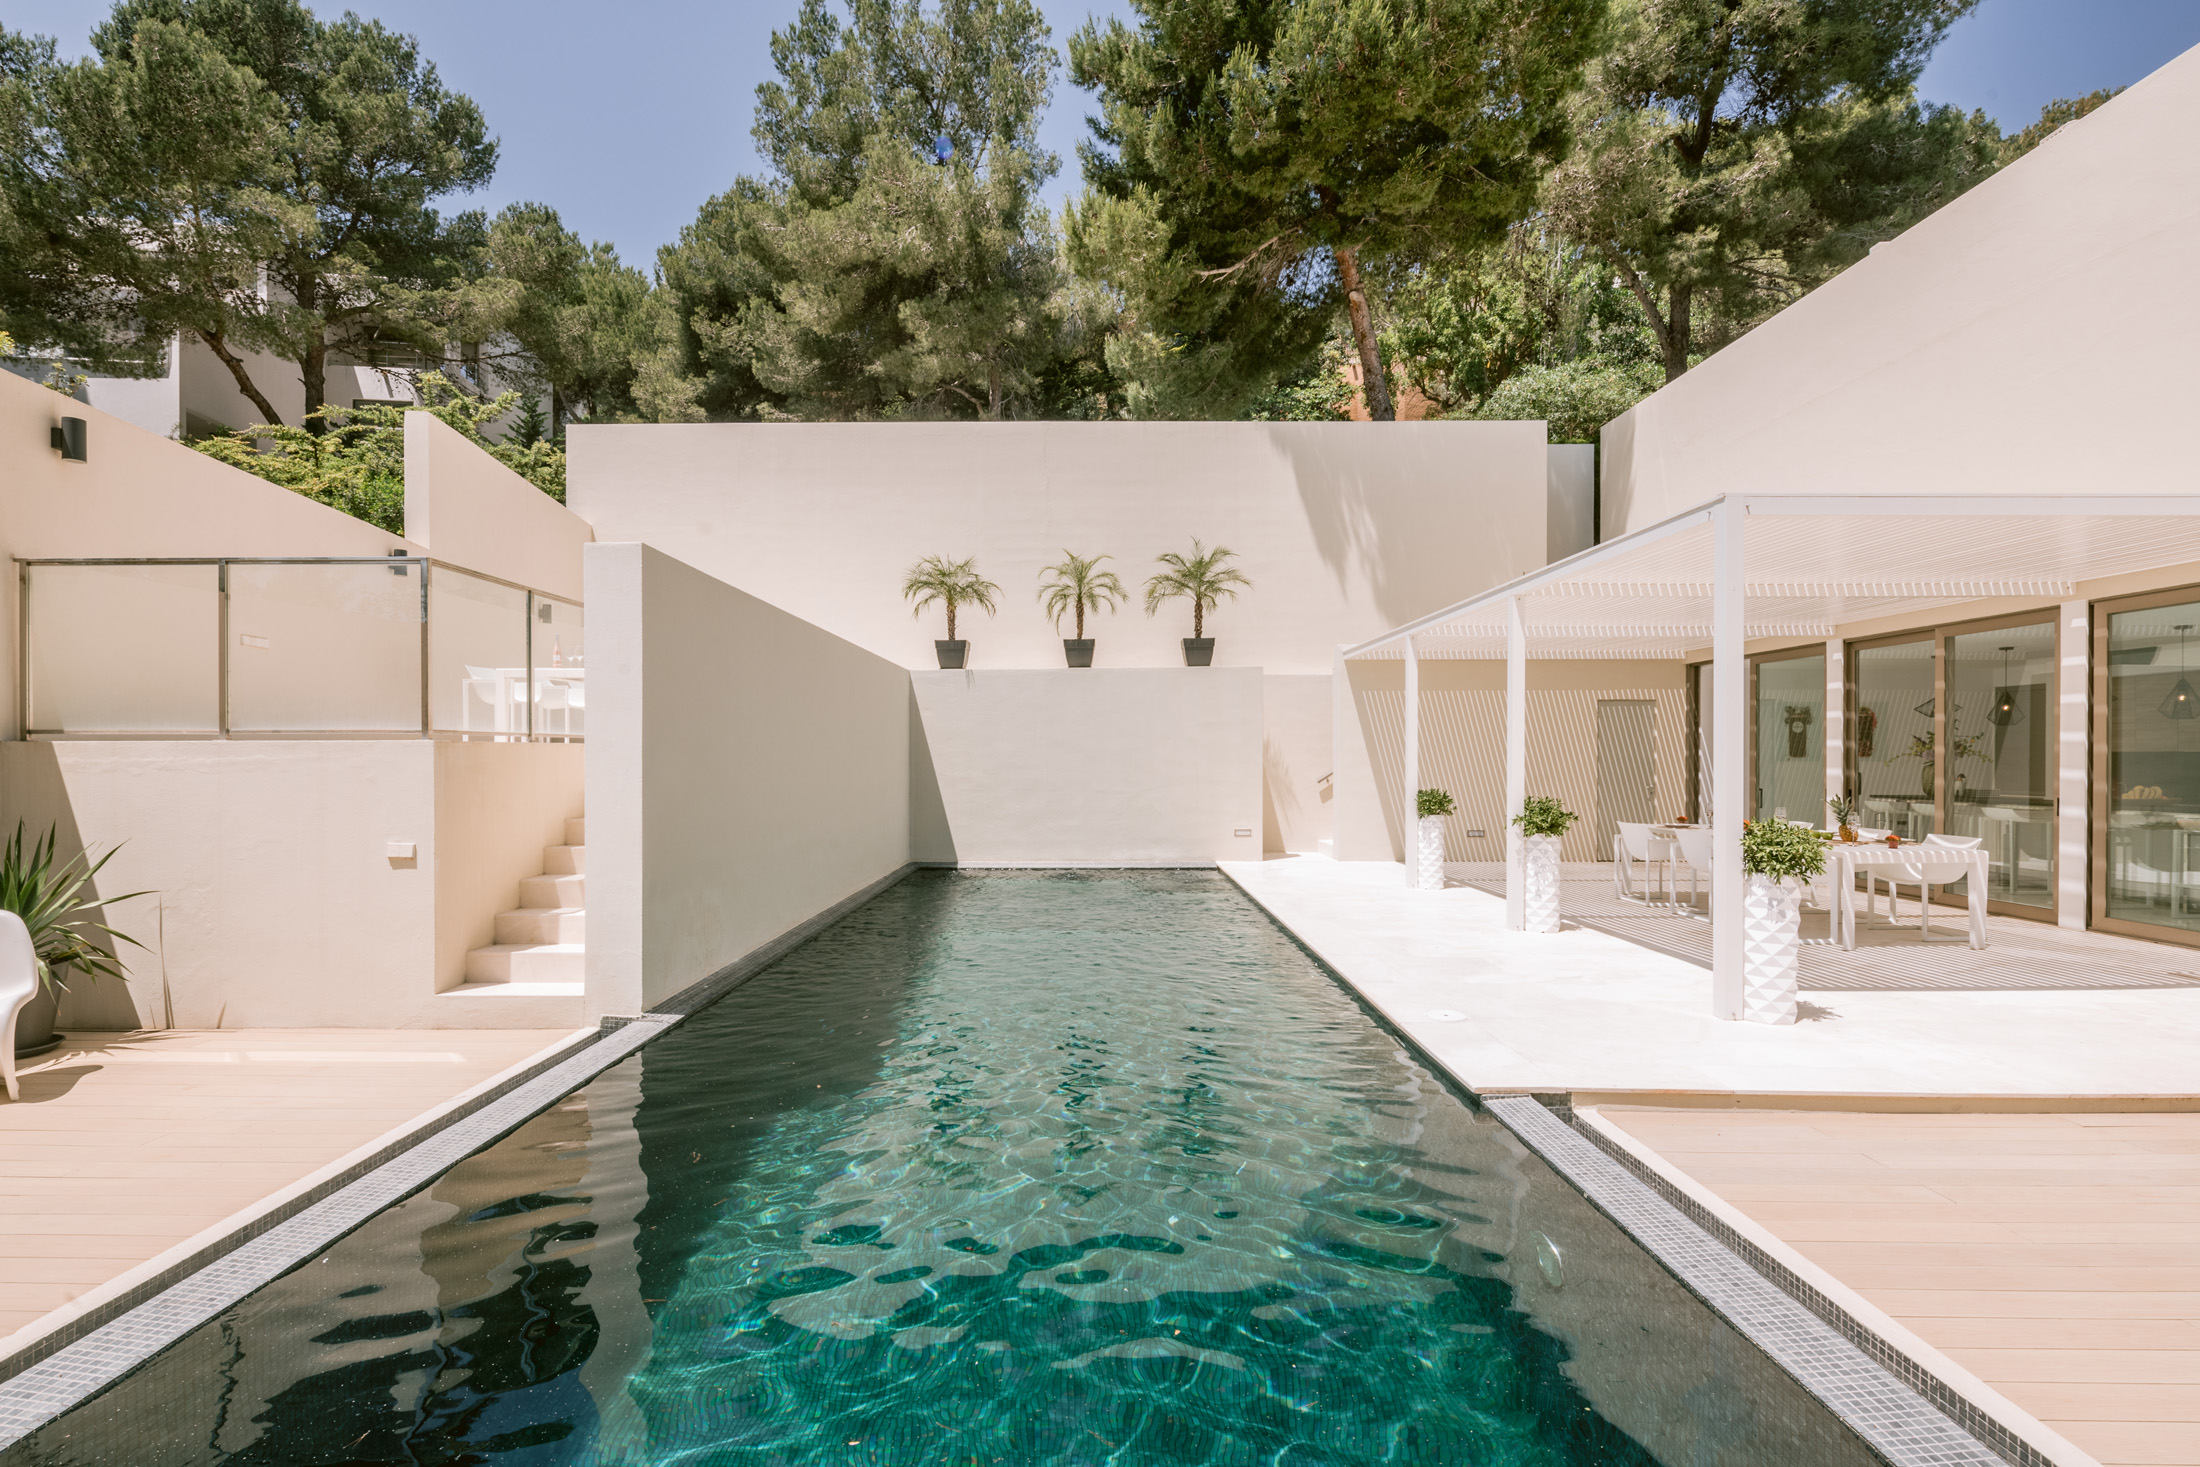 Swimming pool at Can Furnet by Bruno Erpicum